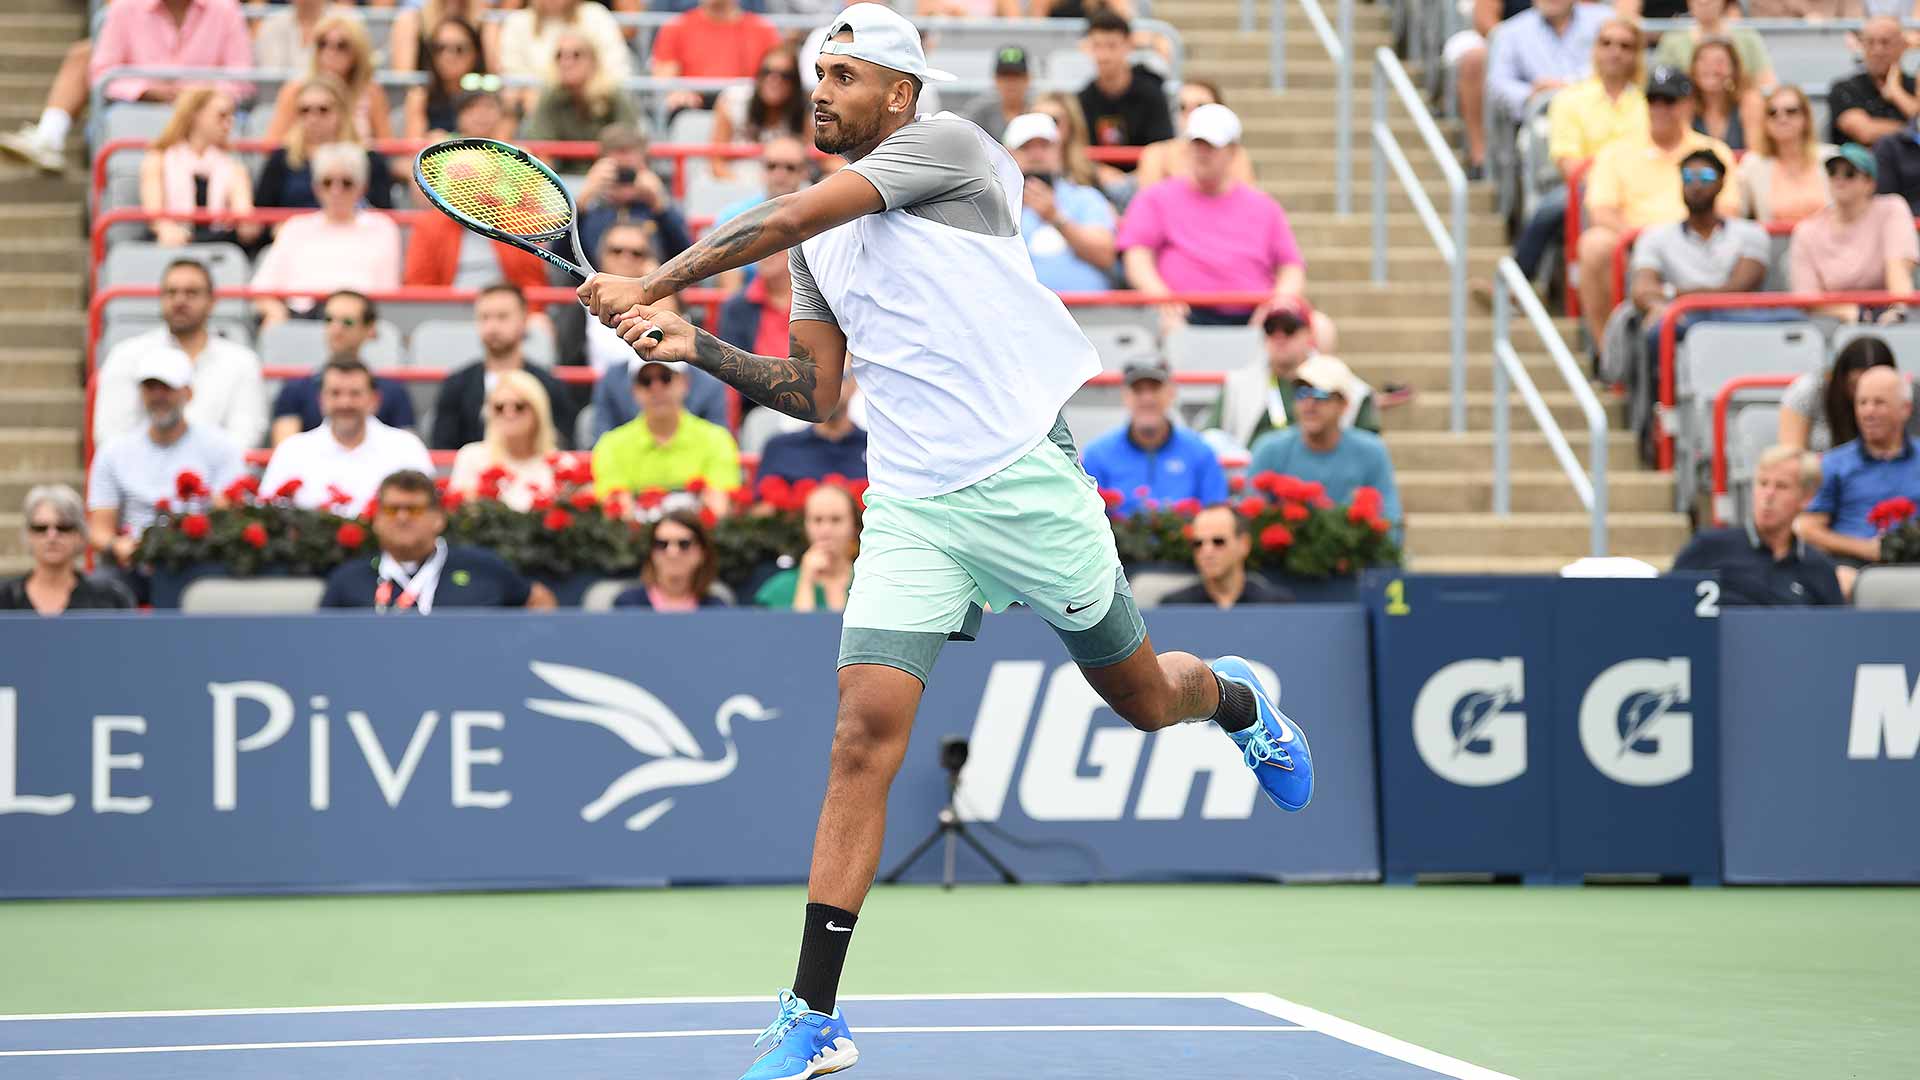 Nick Kyrgios looks to continue his form from Montreal, where he toppled World No. 1 Daniil Medvedev.